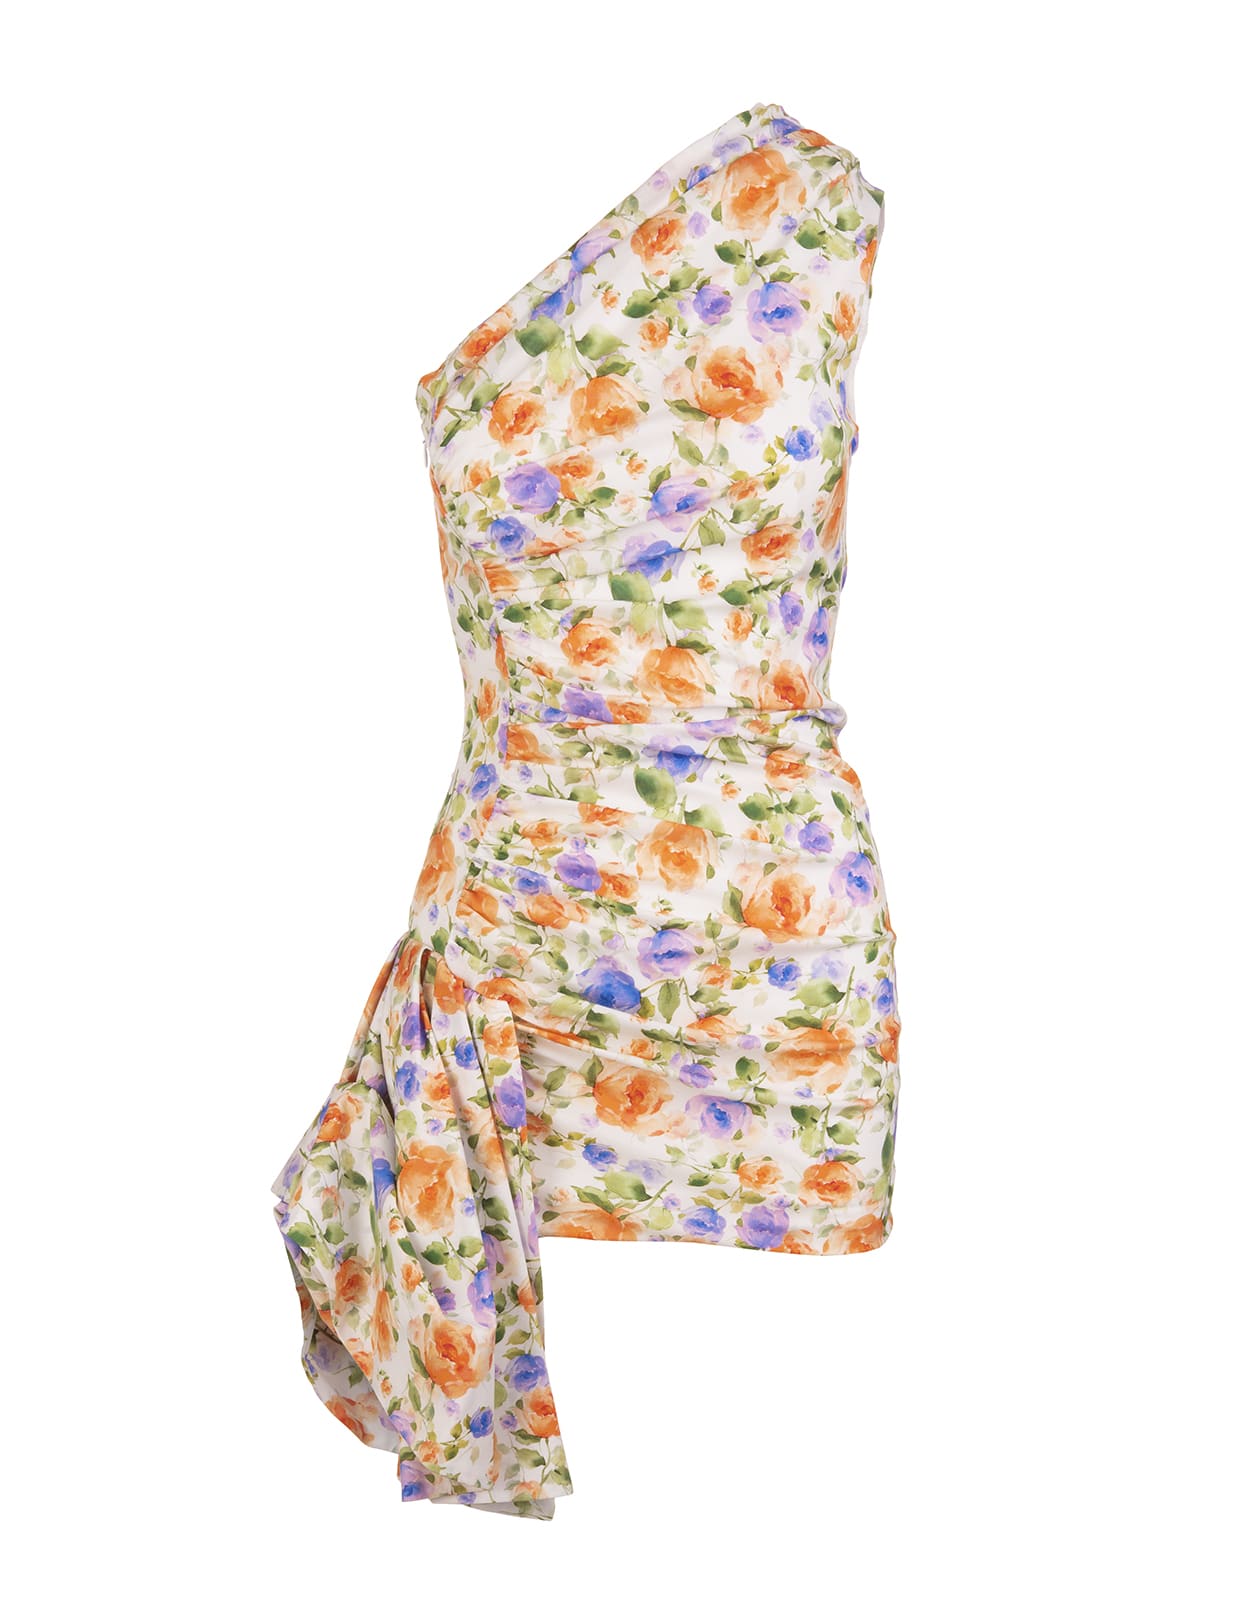 Giuseppe di Morabito Short One Shoulder Dress With Draping And Lilac And Orange All-over Floral Print